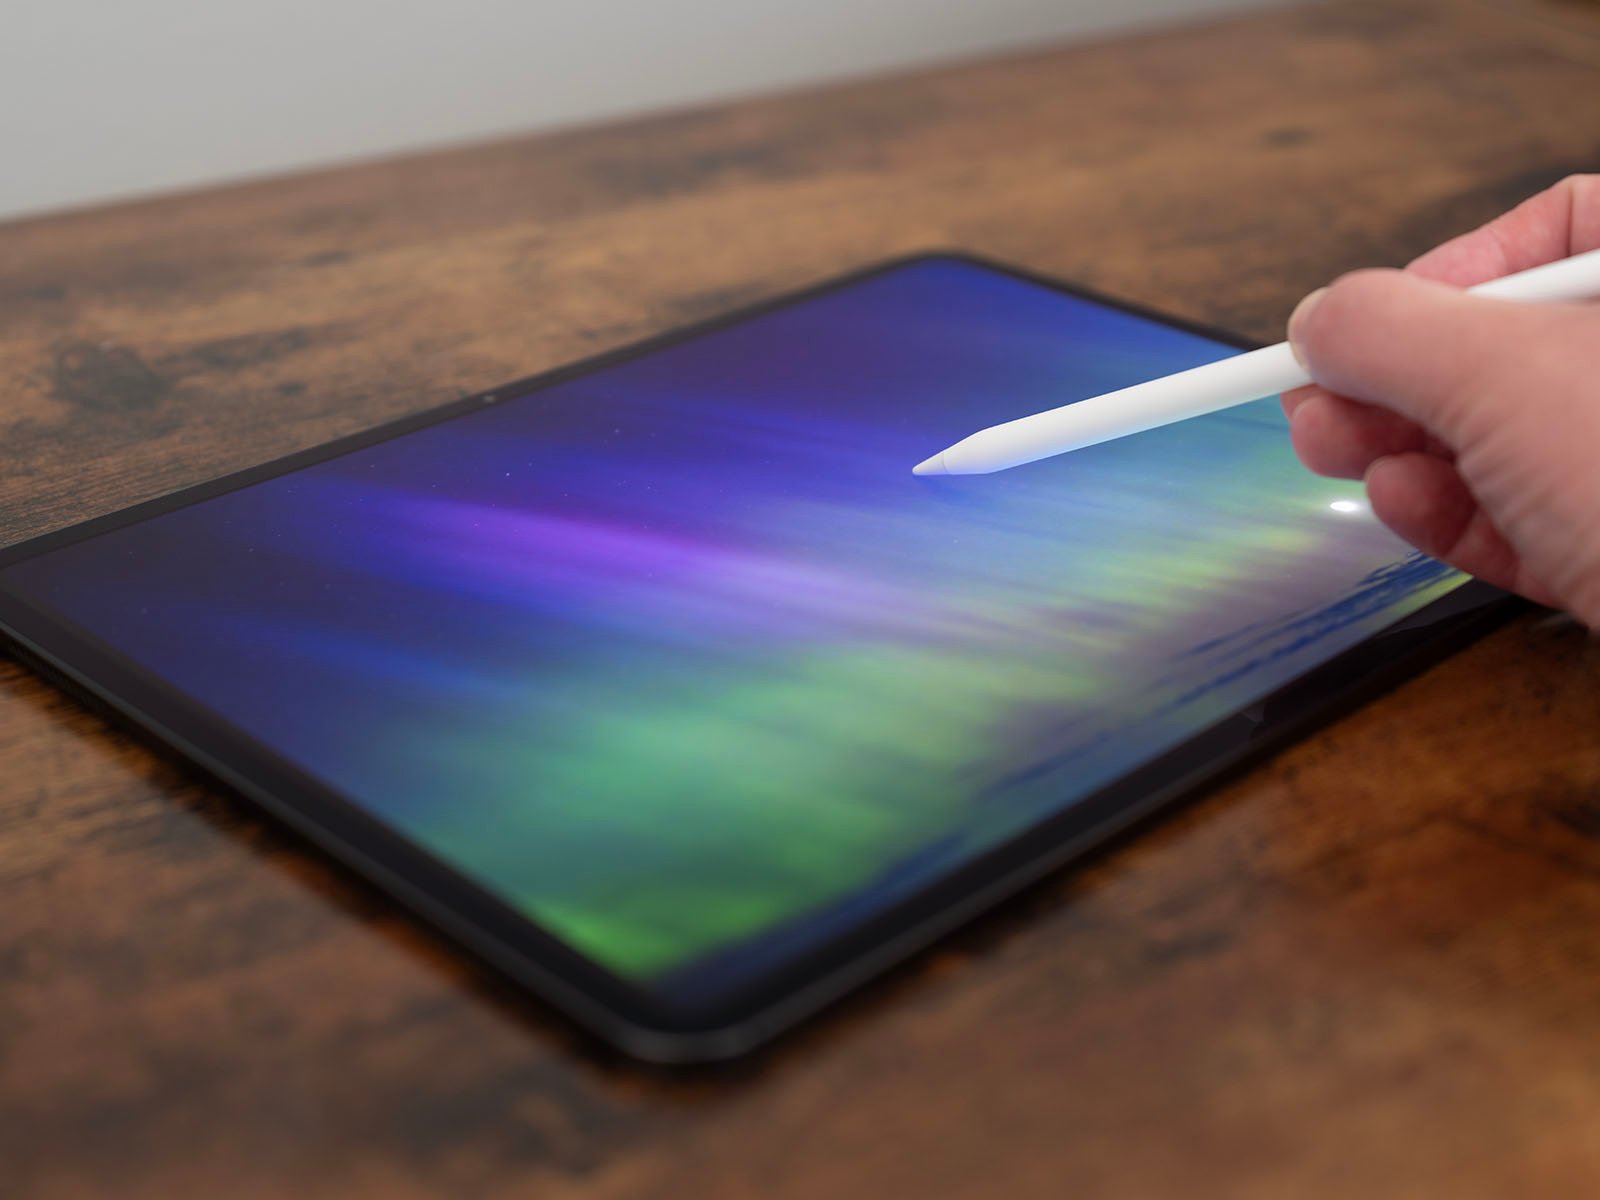 A hand holding a stylus hovers over a tablet screen displaying a colorful gradient of blues, purples, and greens, resembling the aurora borealis. The scene is set on a wooden surface.